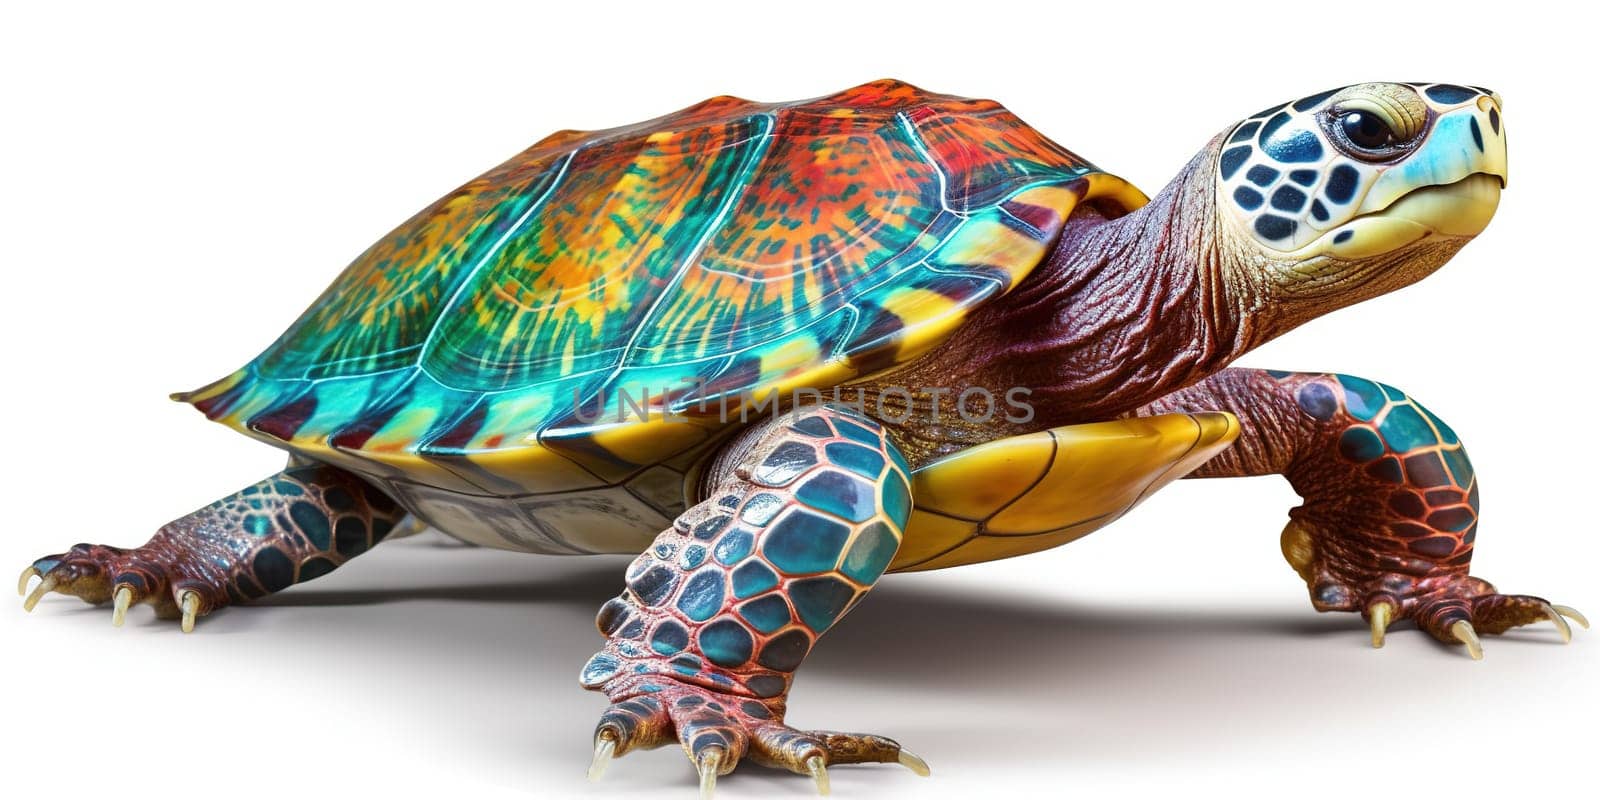 Multicolored Turtle On A White Background by GekaSkr